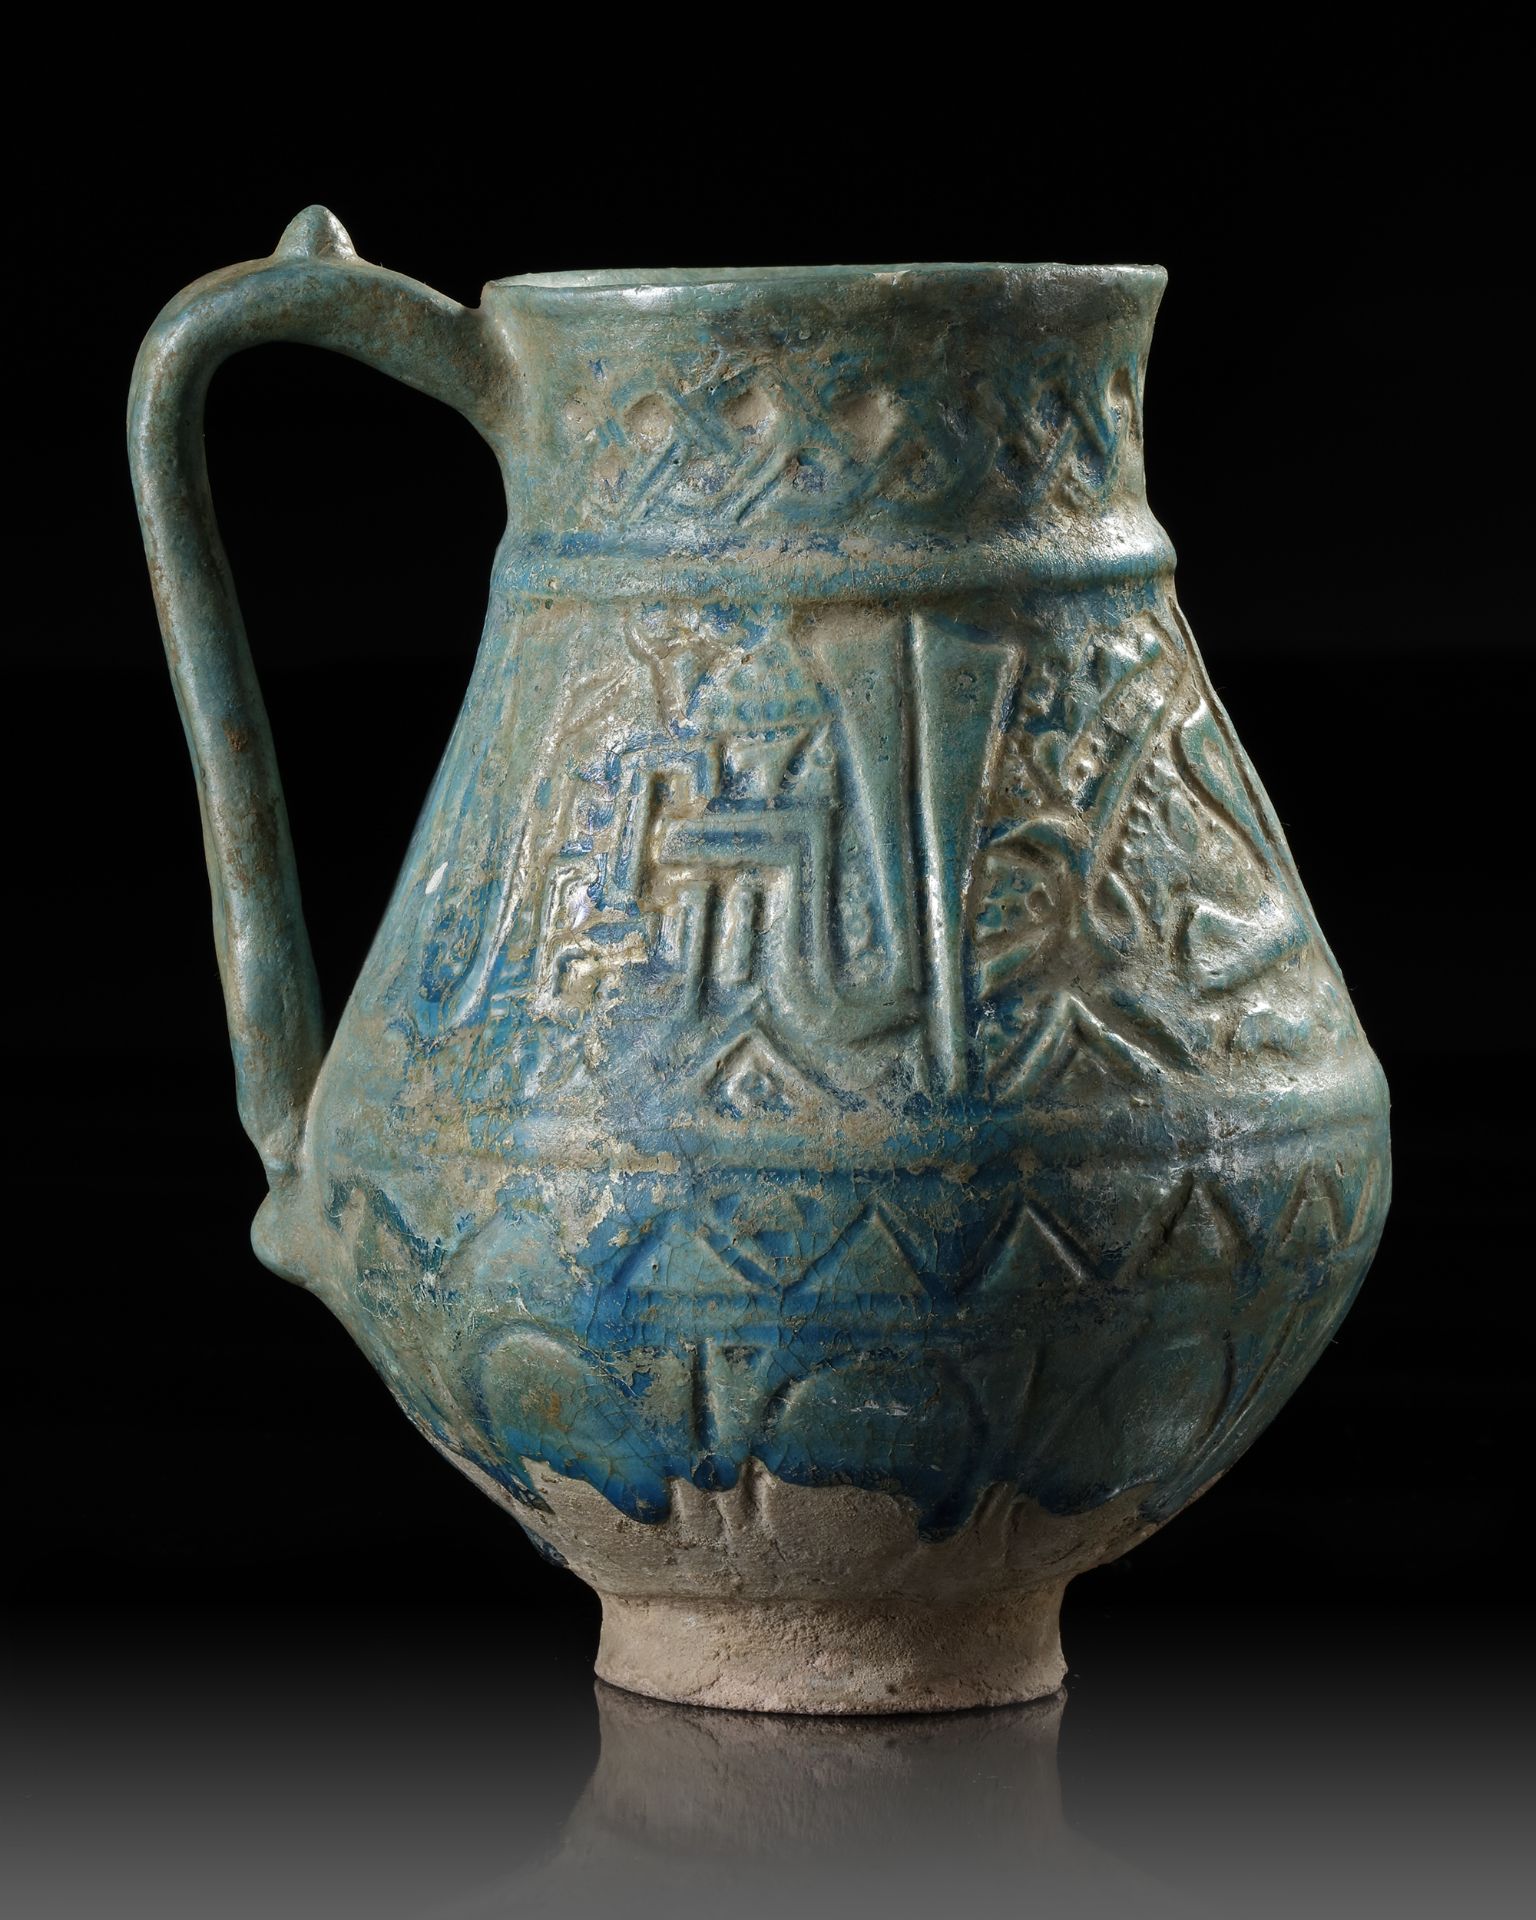 A TURQUOISE GLAZED POTTERY EWER, PROBABLY NISHAPUR, 12TH CENTURY - Image 5 of 8